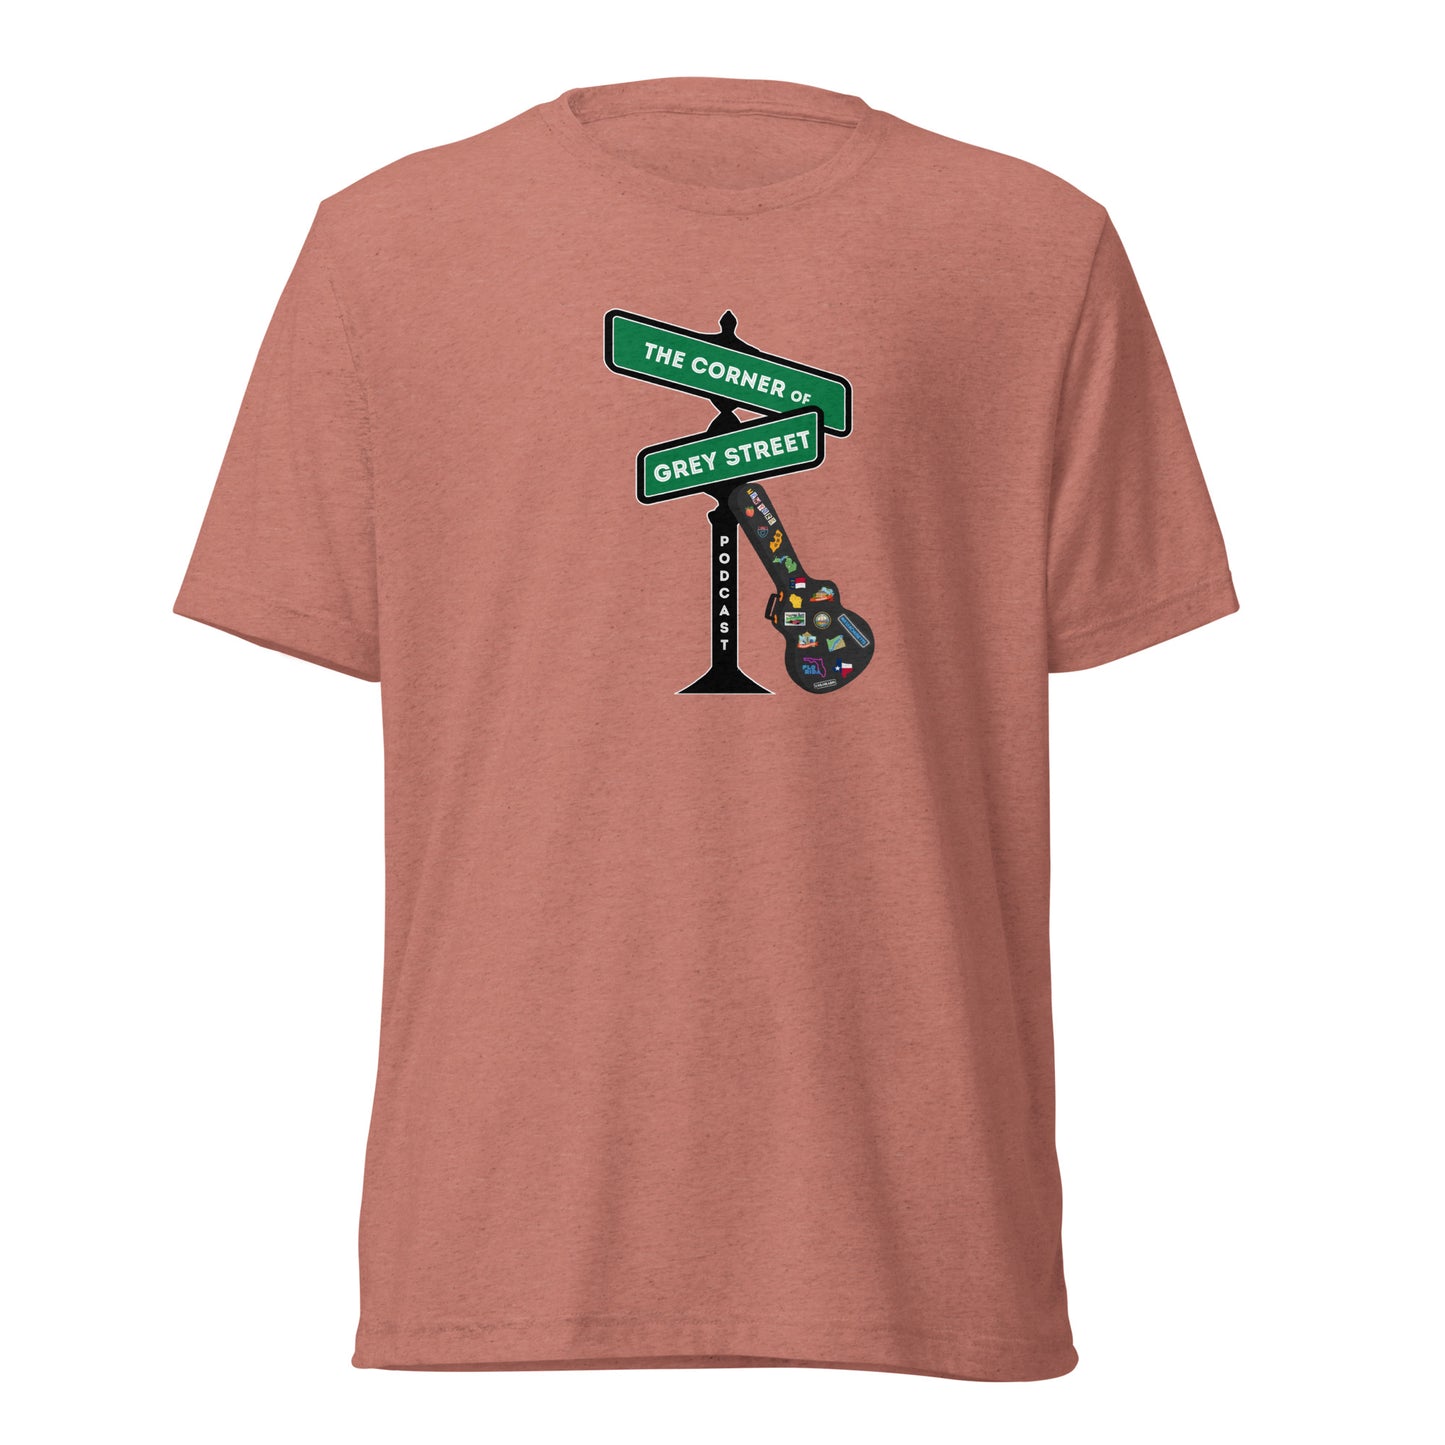 COGS On The Road Shirt